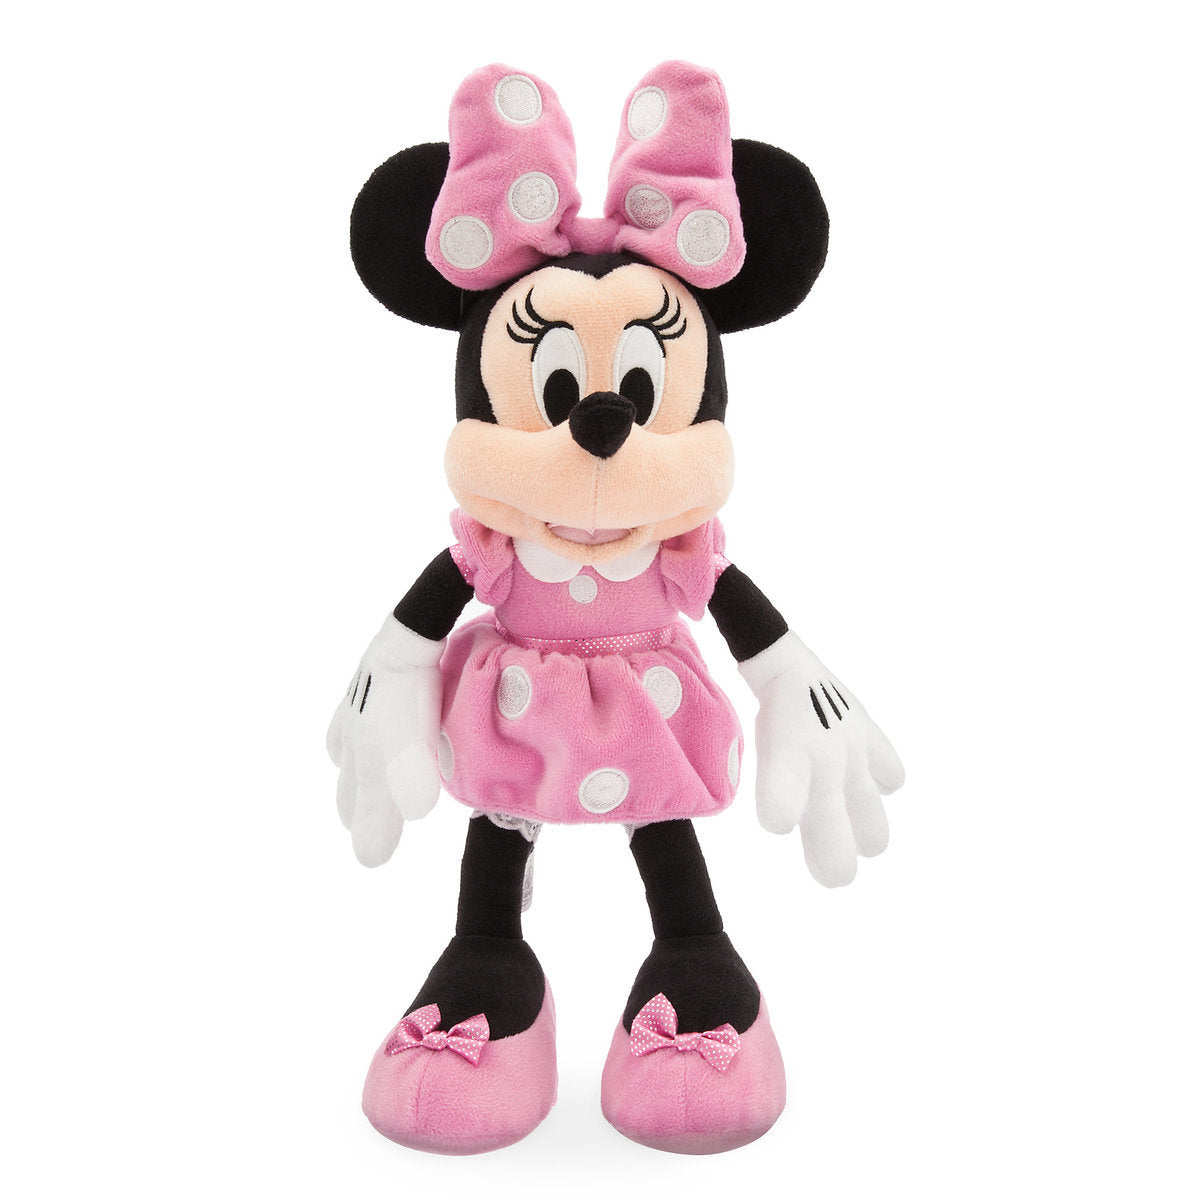 Disney Store Minnie Mouse Plush Pink Small 14 inc New with Tags